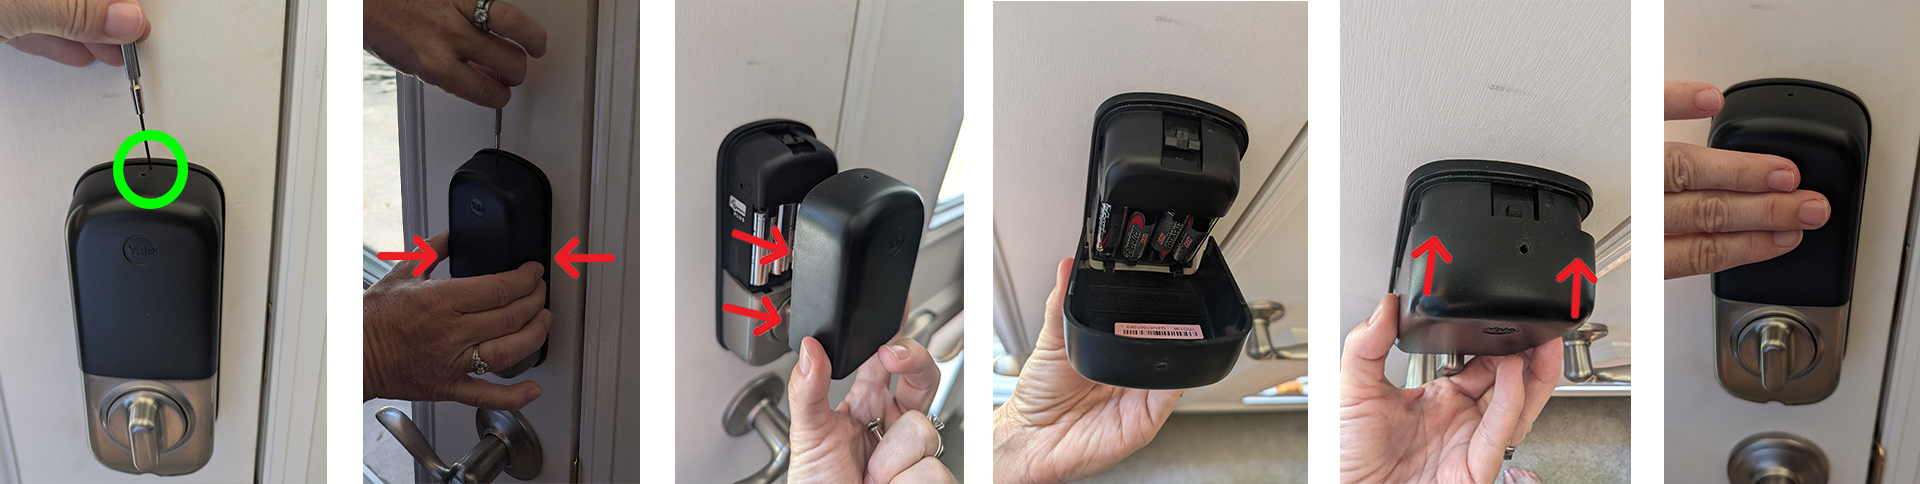 Steps to replacing batteries in new Yale smart lock